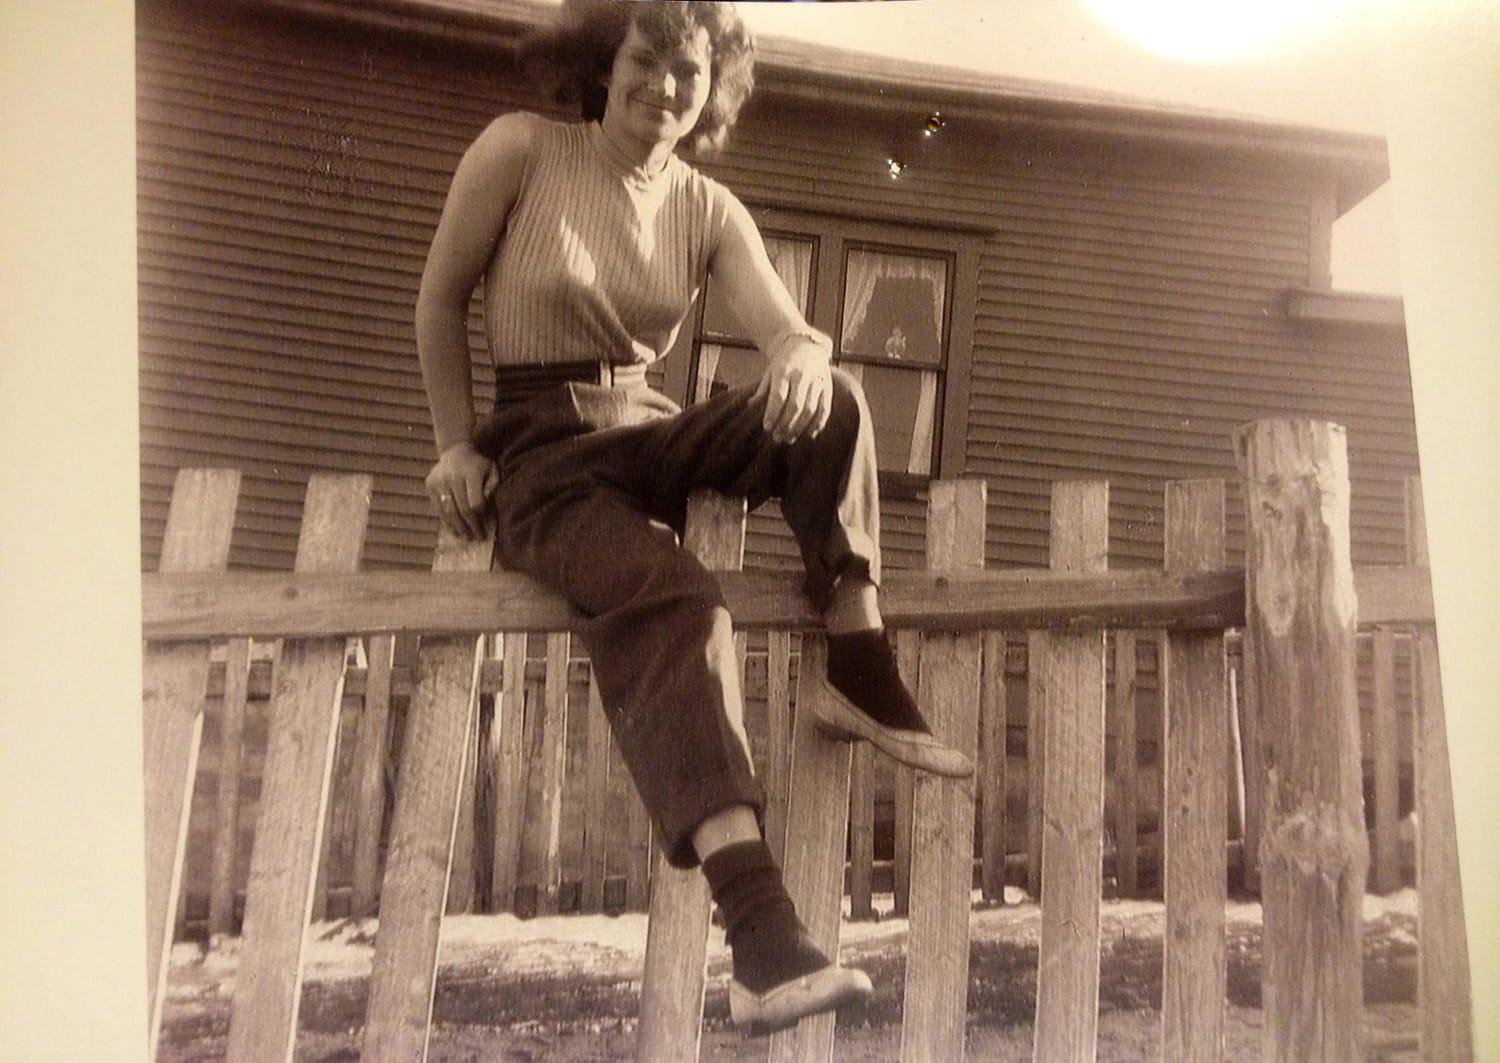 My grandmother hanging out in Canada sometime in the 1950s